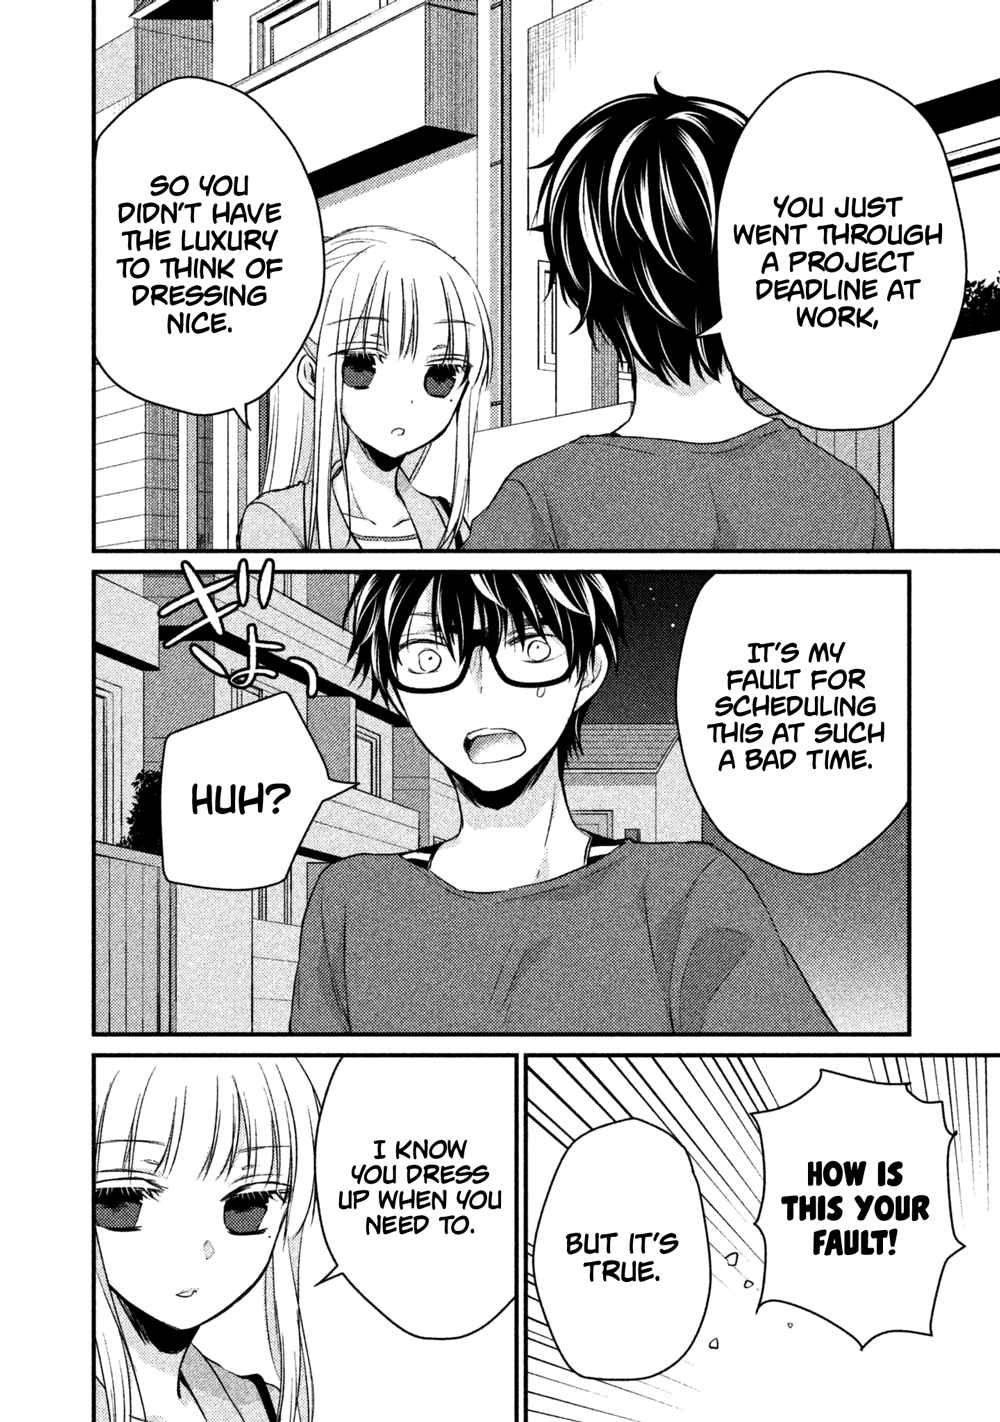 We May Be An Inexperienced Couple But... Vol. 2 Ch. 16 My Wife is Too Cute it Hurts